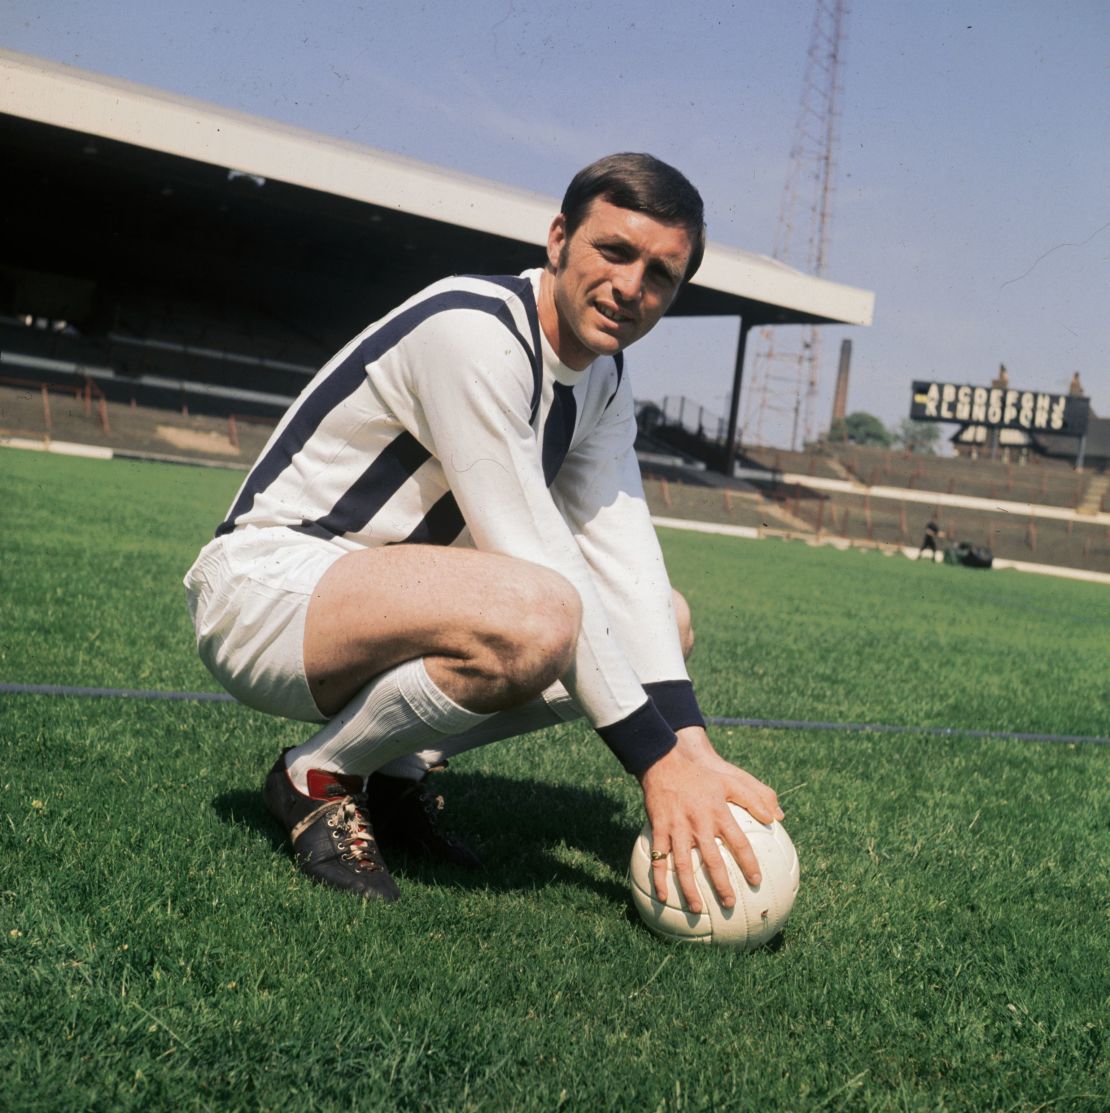 Former footballer Jeff Astle, who died aged 59, had been suffering from CTE.